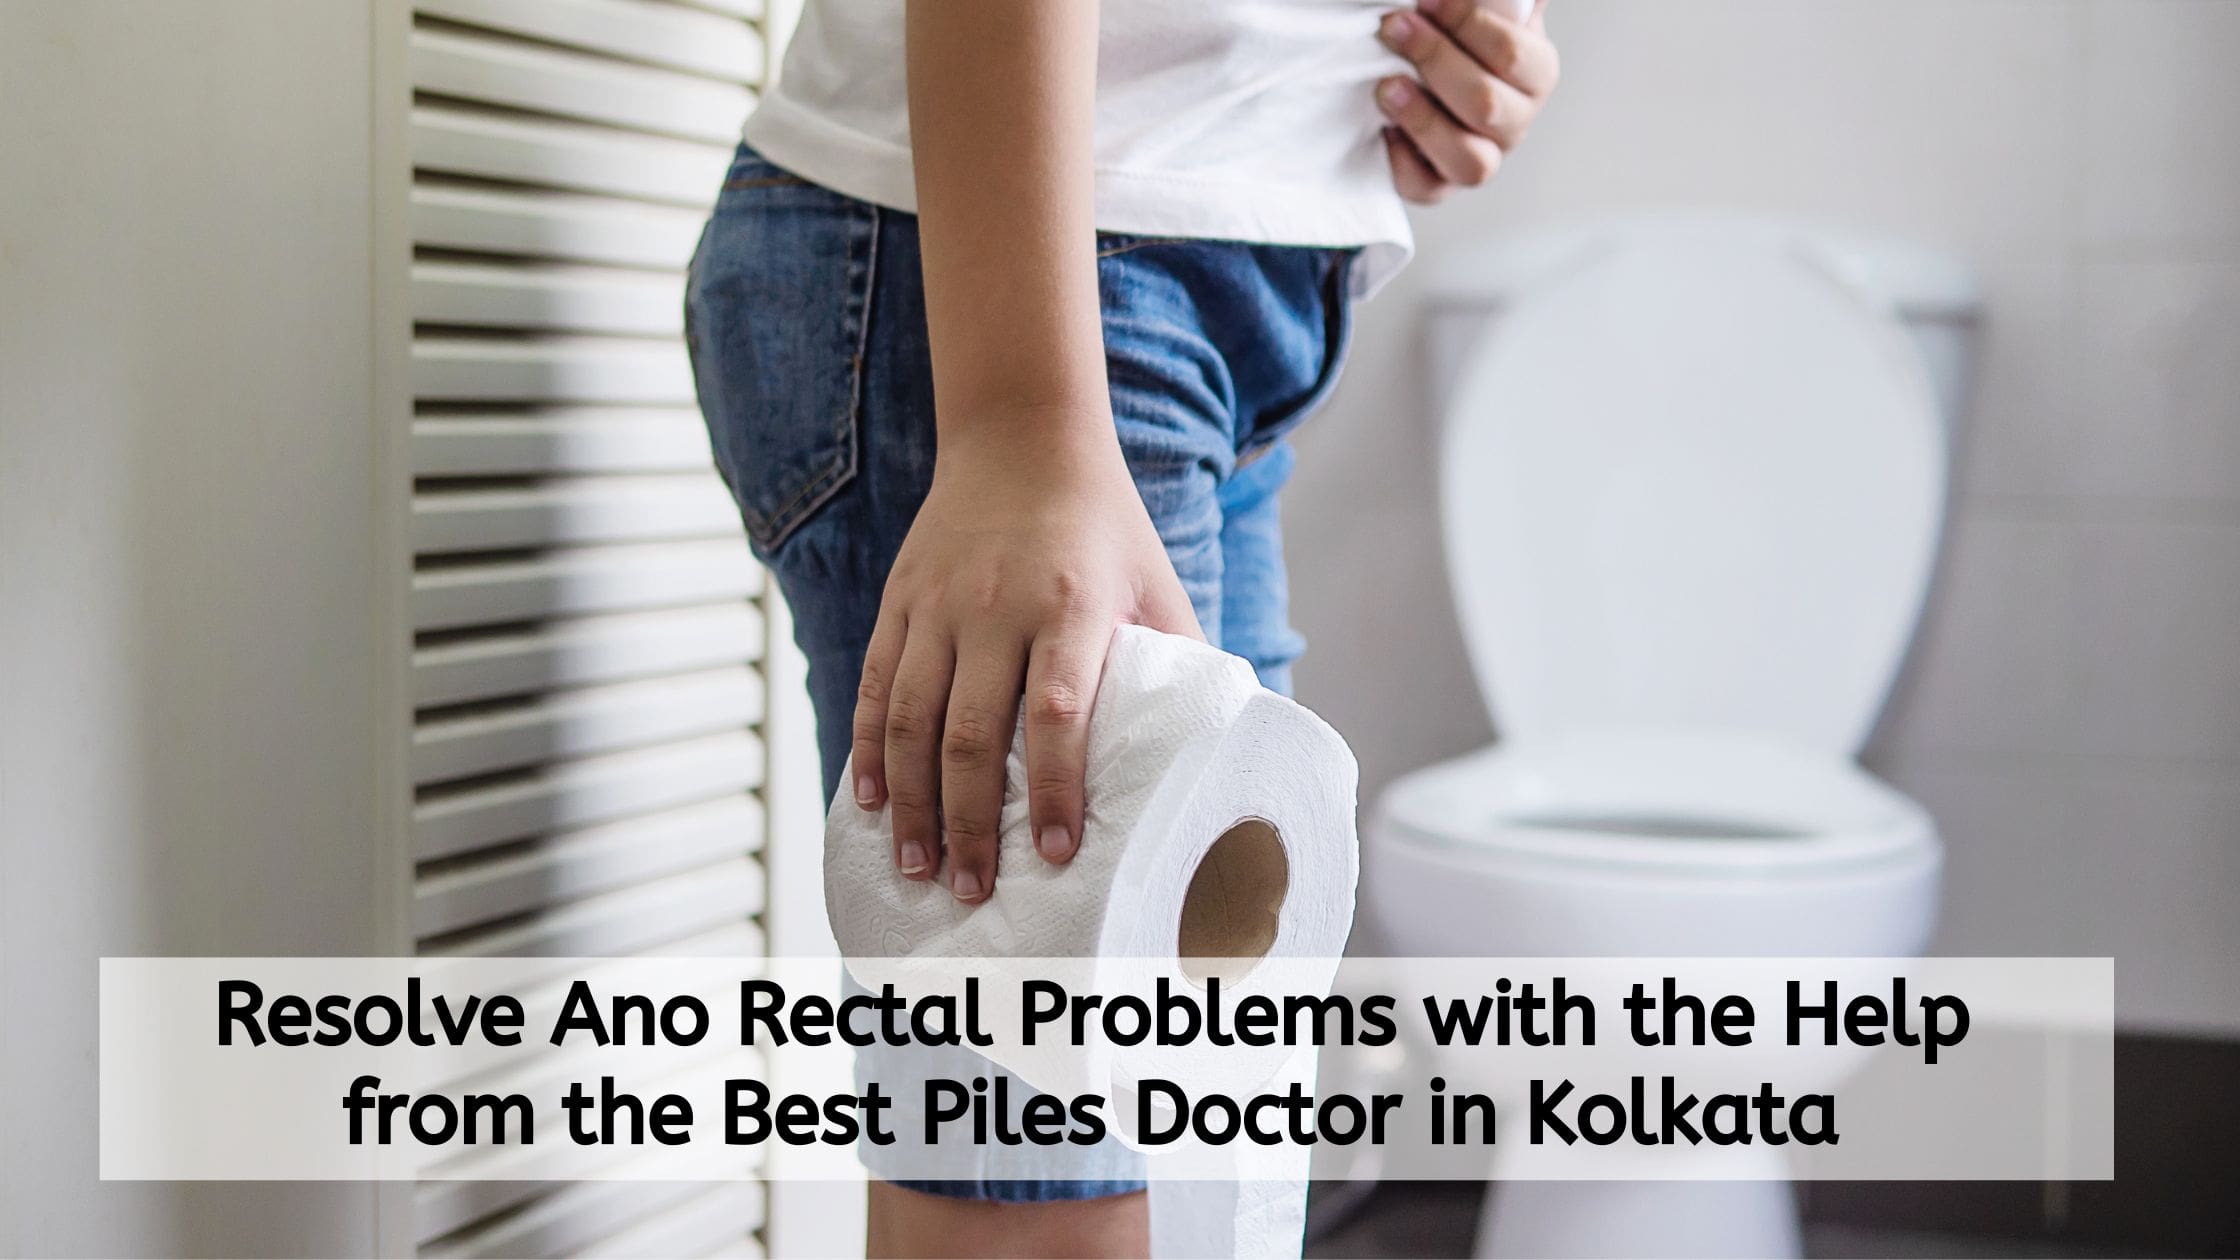 You are currently viewing Resolve Ano Rectal Problems with the Help from the Best Piles Doctor in Kolkata